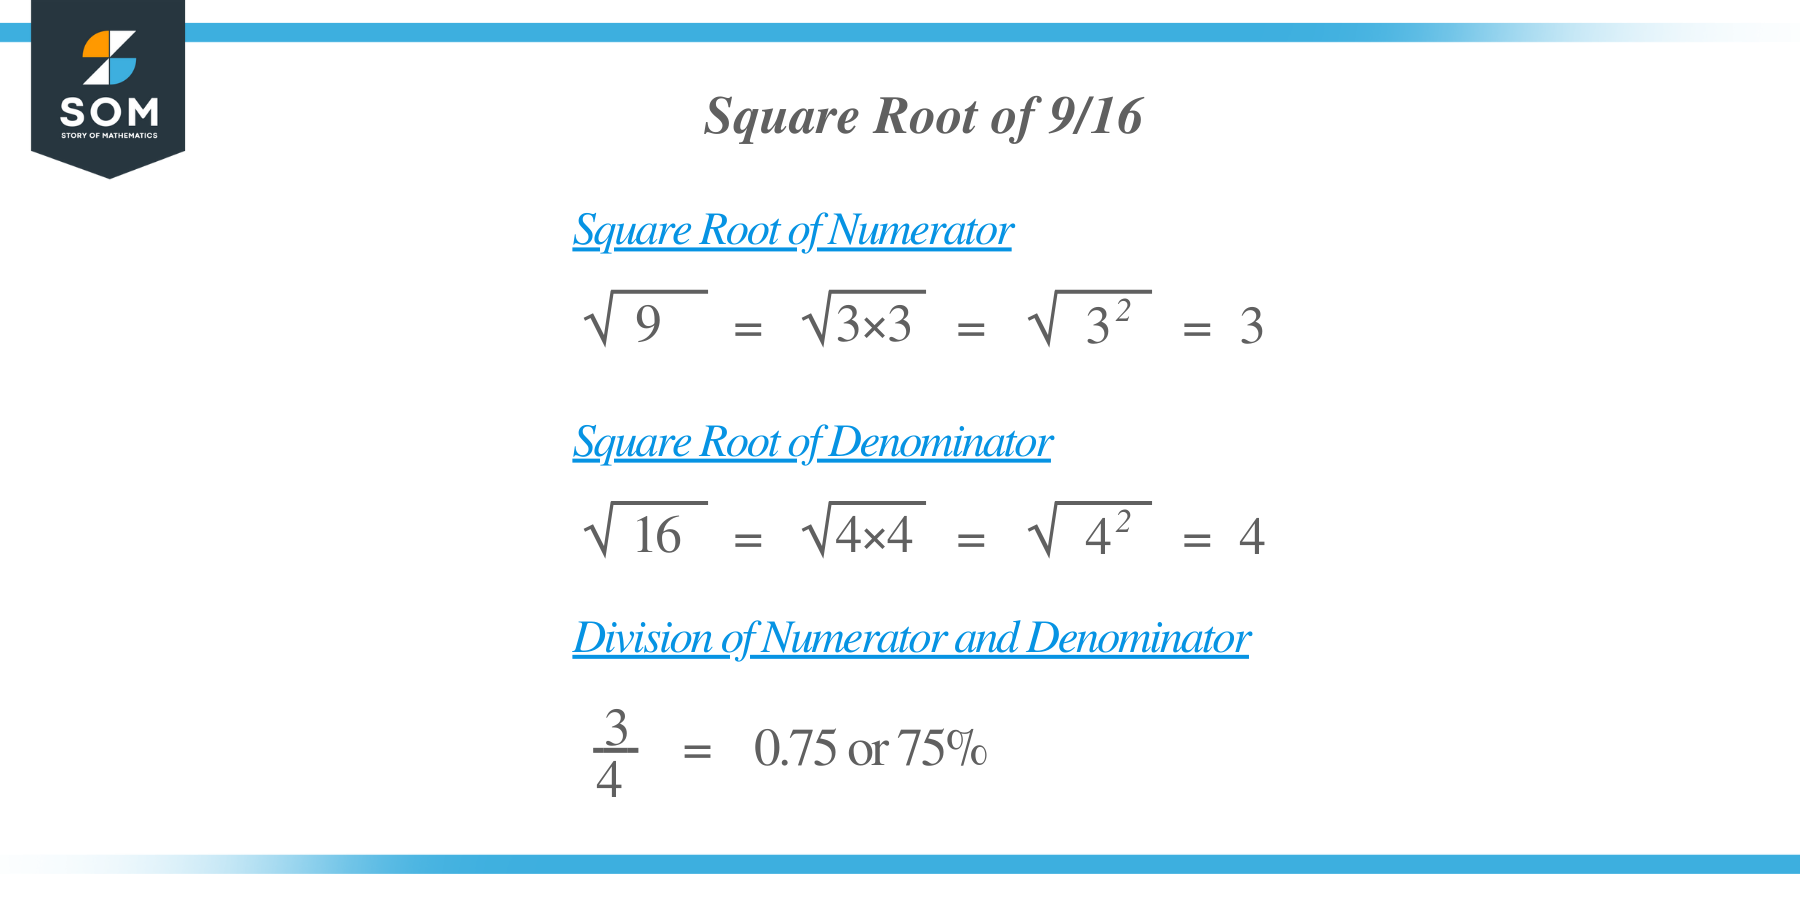 Square Root of 9/16